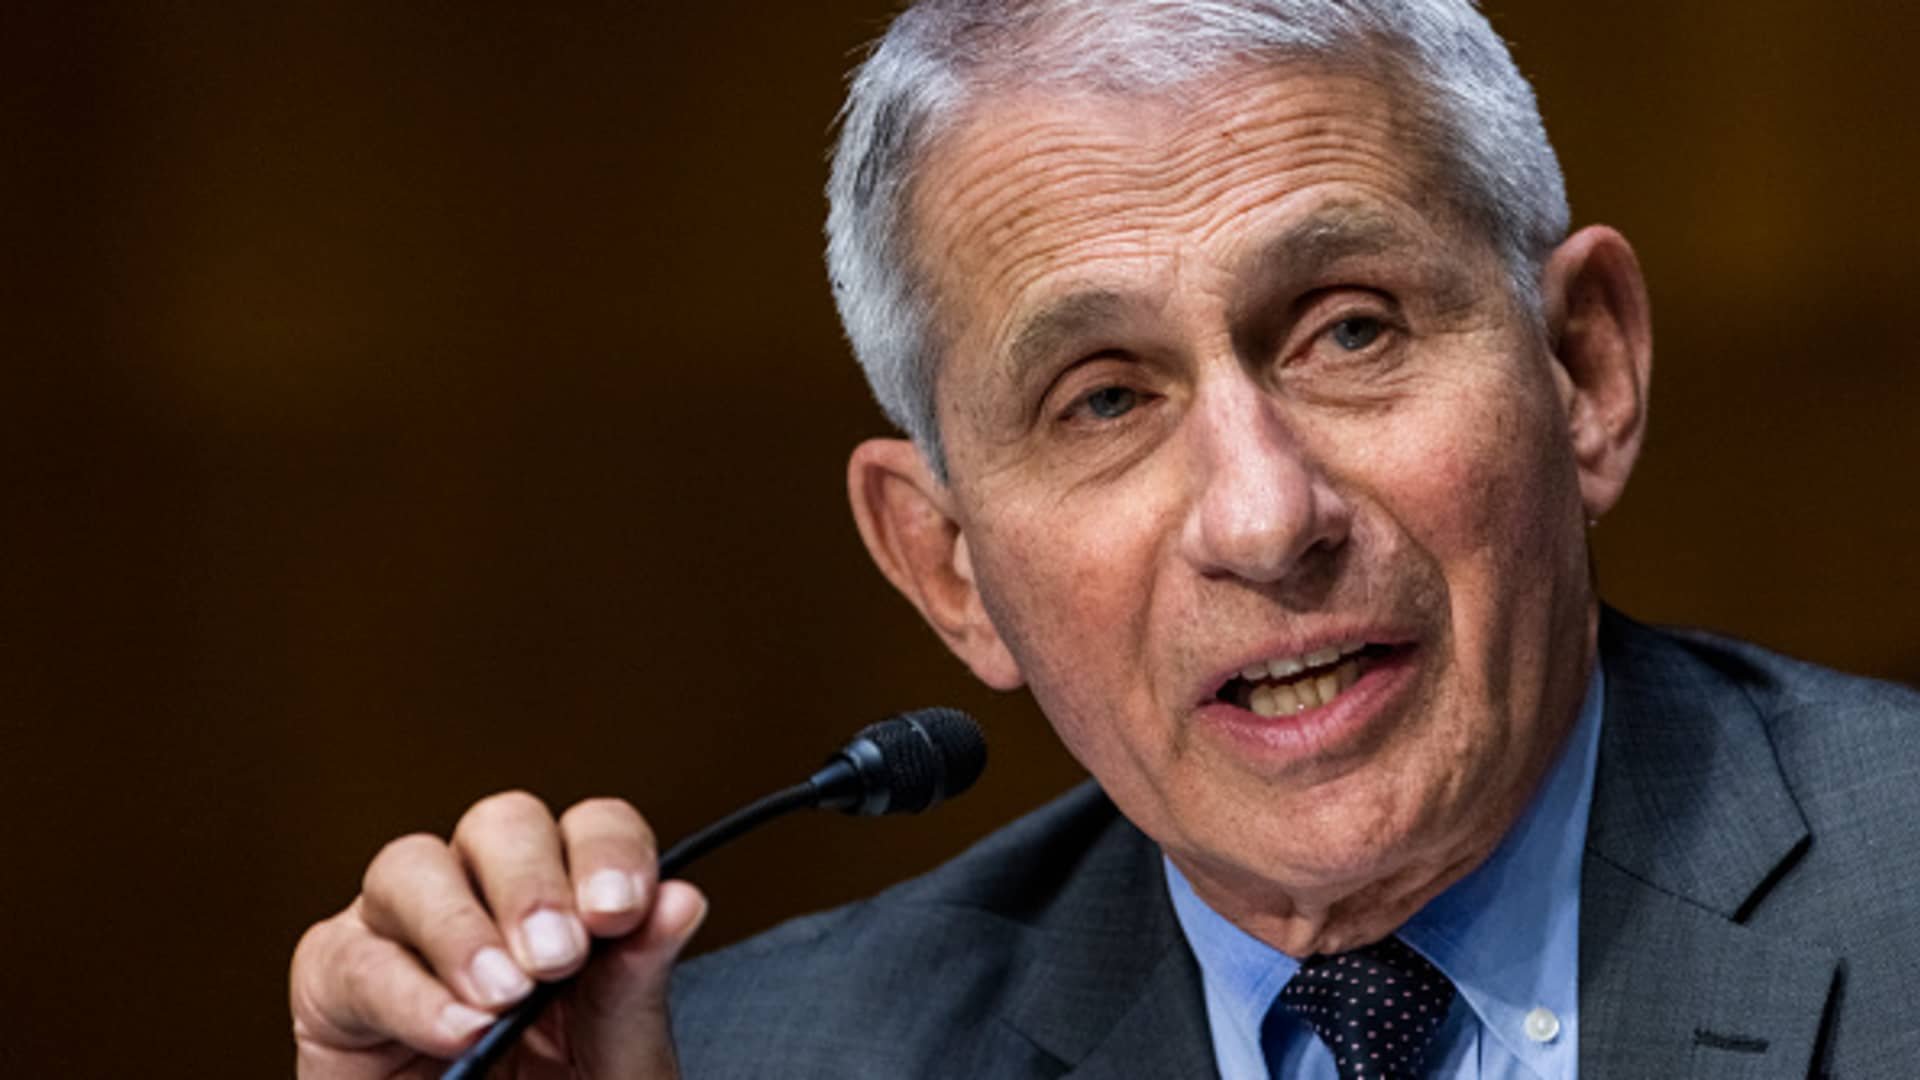 Fauci says U.S. can still end HIV epidemic by 2030 despite Covid pandemic